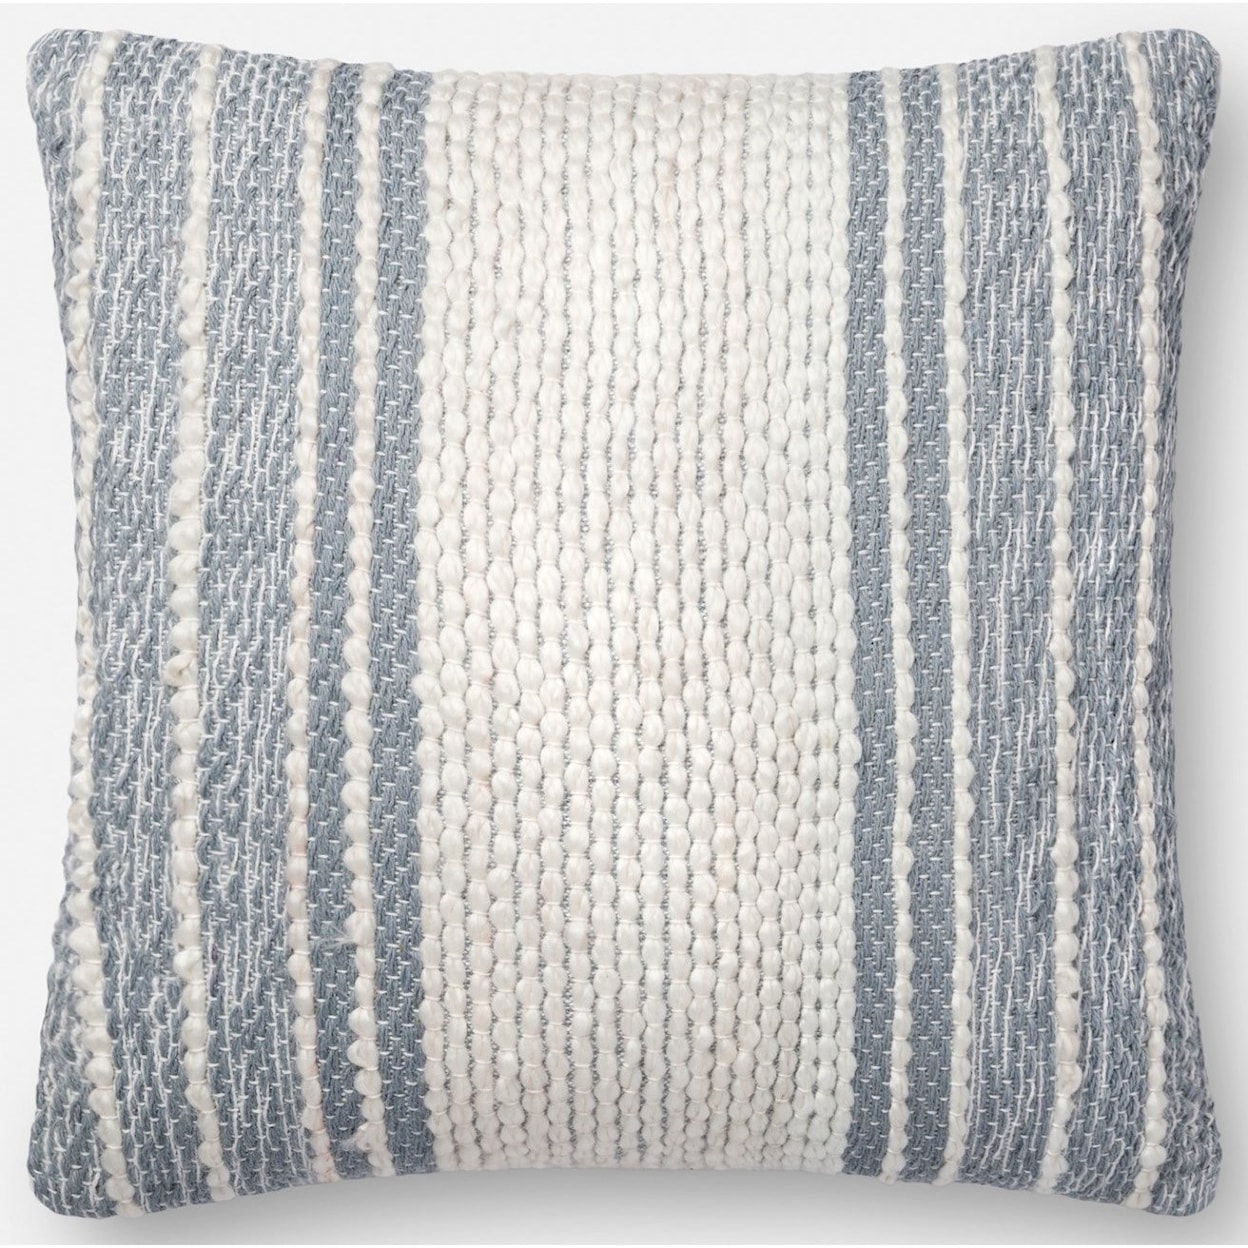 Magnolia Home by Joanna Gaines for Loloi Accent Pillows 18" x 18" Polyester Pillow